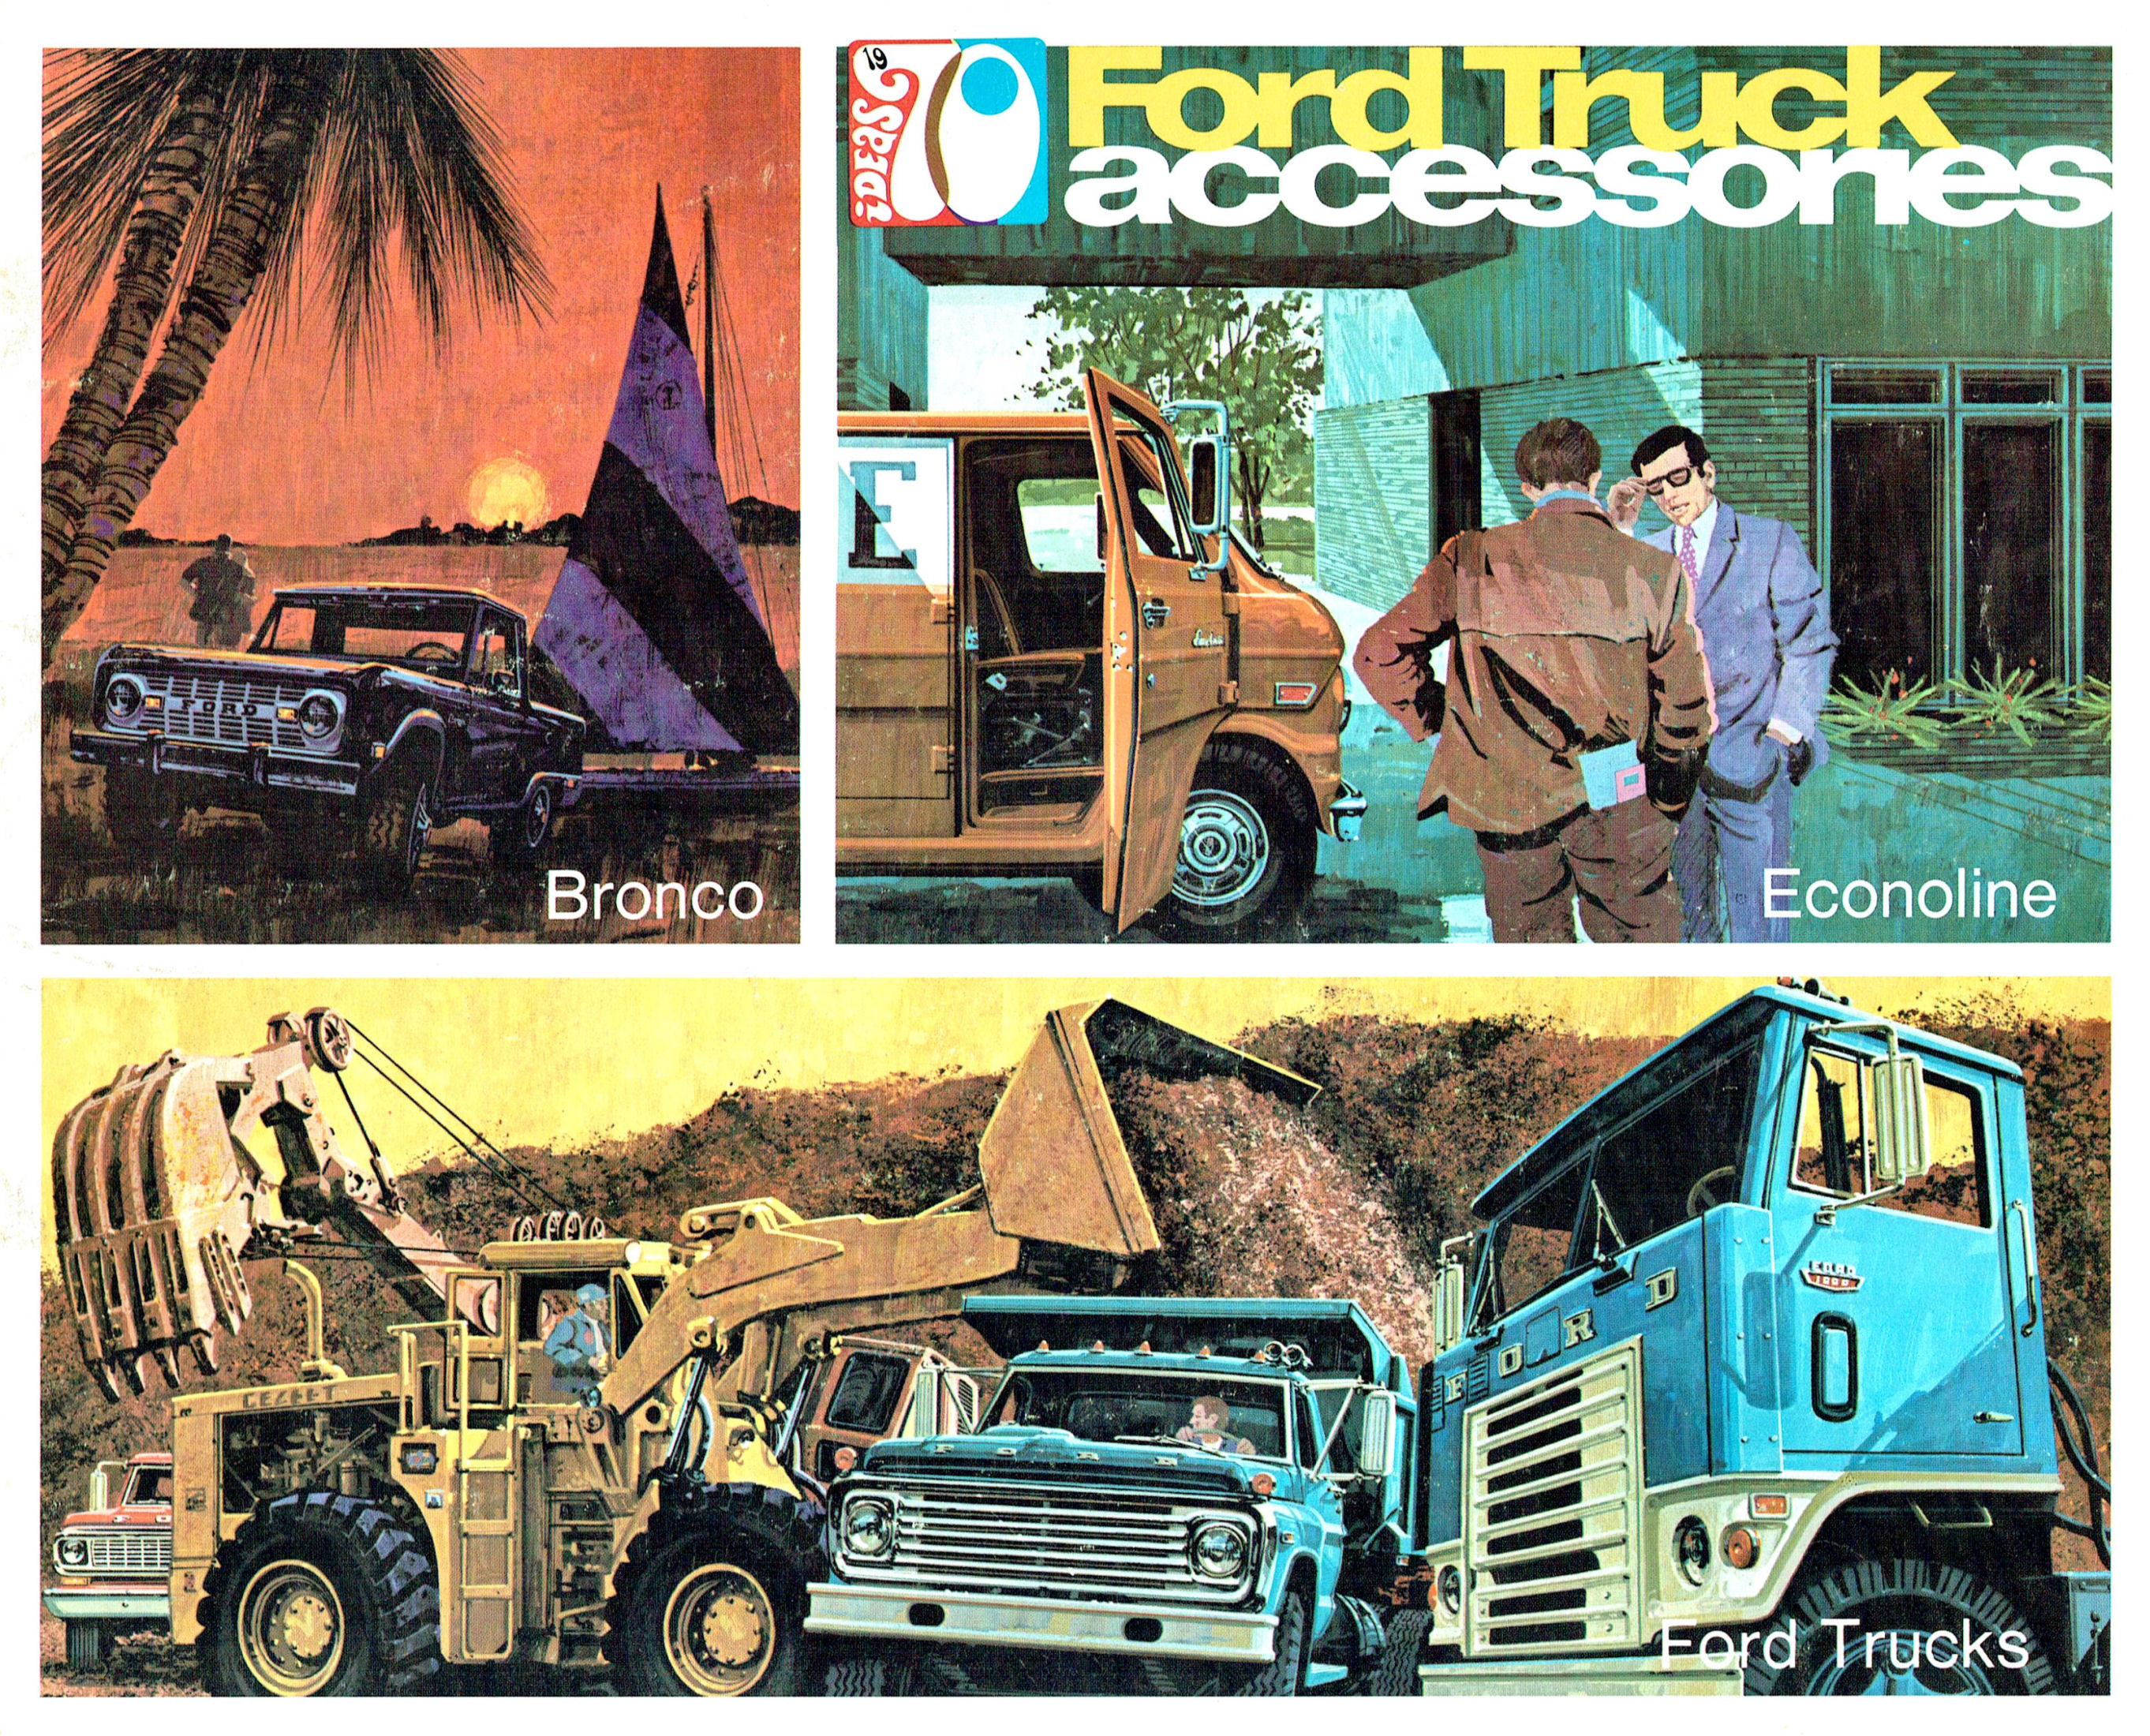 1970 Ford Truck Accessories-01